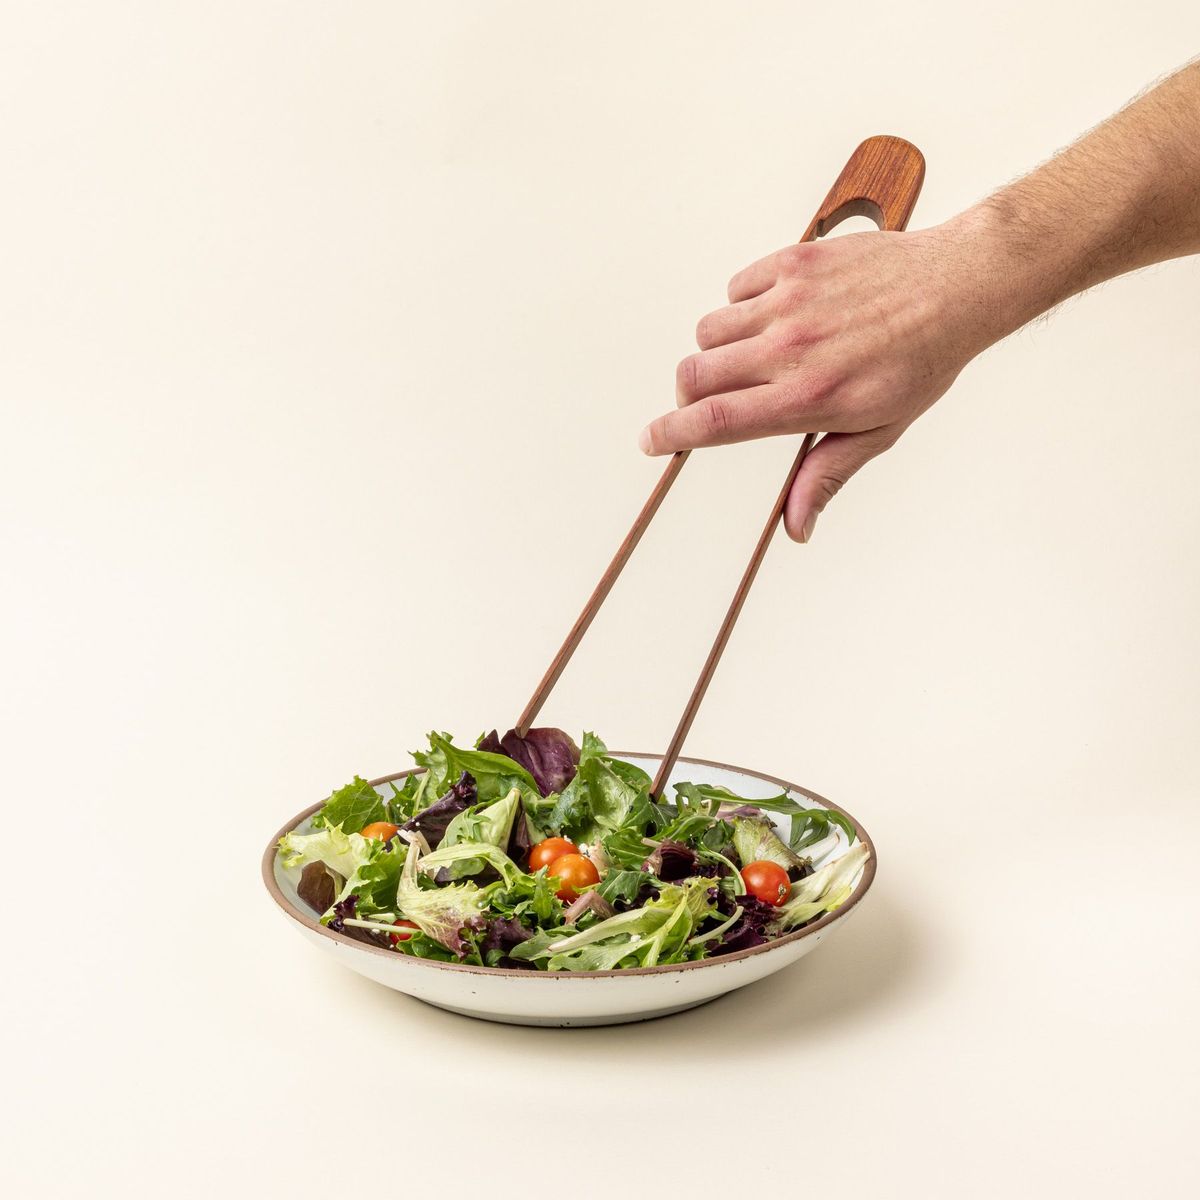 A hand holds simple and minimal wood rectangular tongs reaching to place a small side salad.